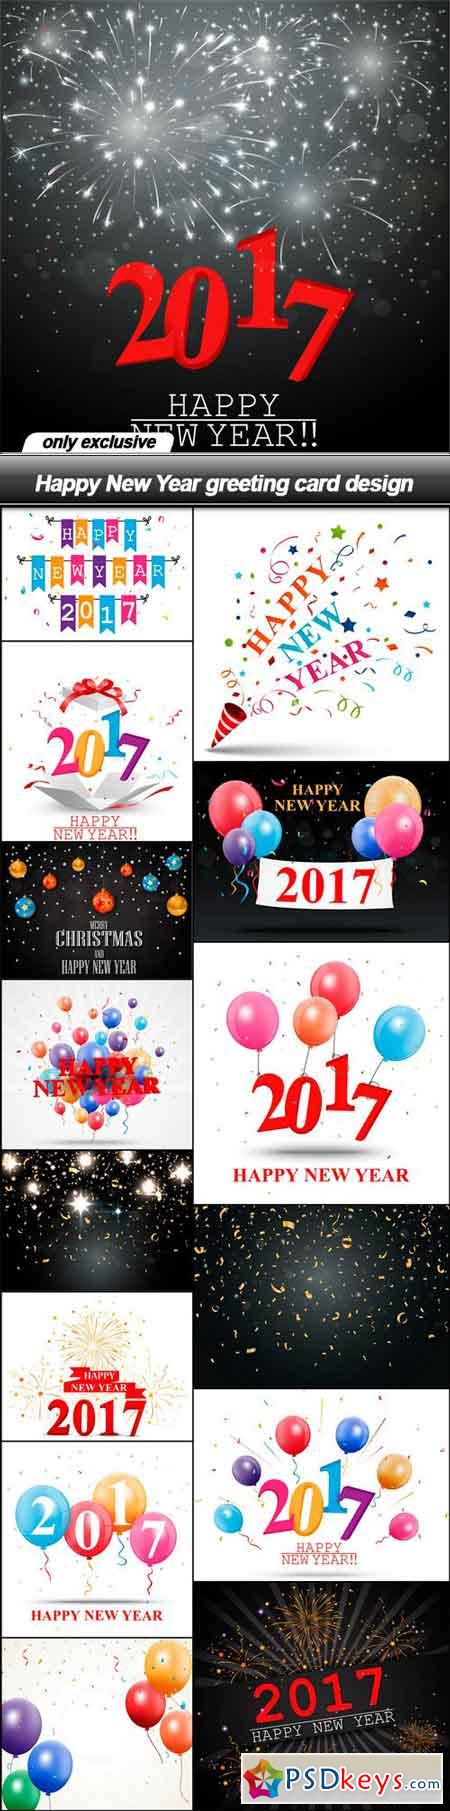 Happy New Year greeting card design - 15 EPS